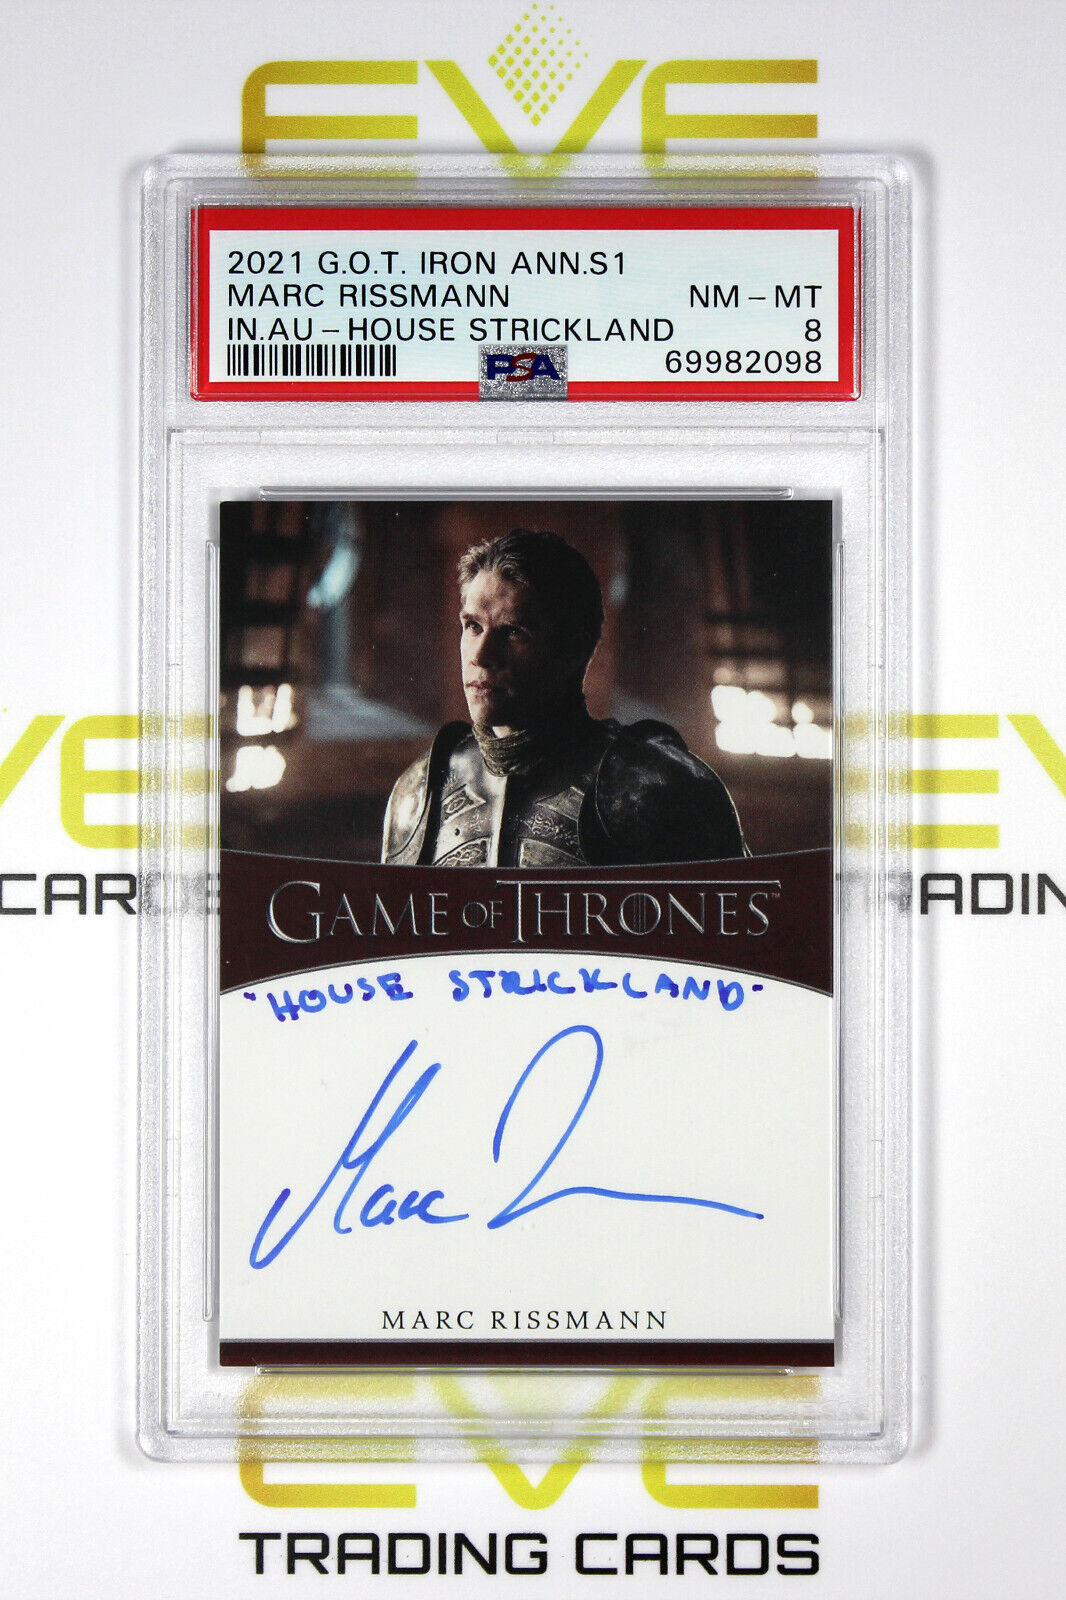 Graded Game of Thrones Auto Card - 2021 Marc Rissman as Harry Strickland - PSA 8